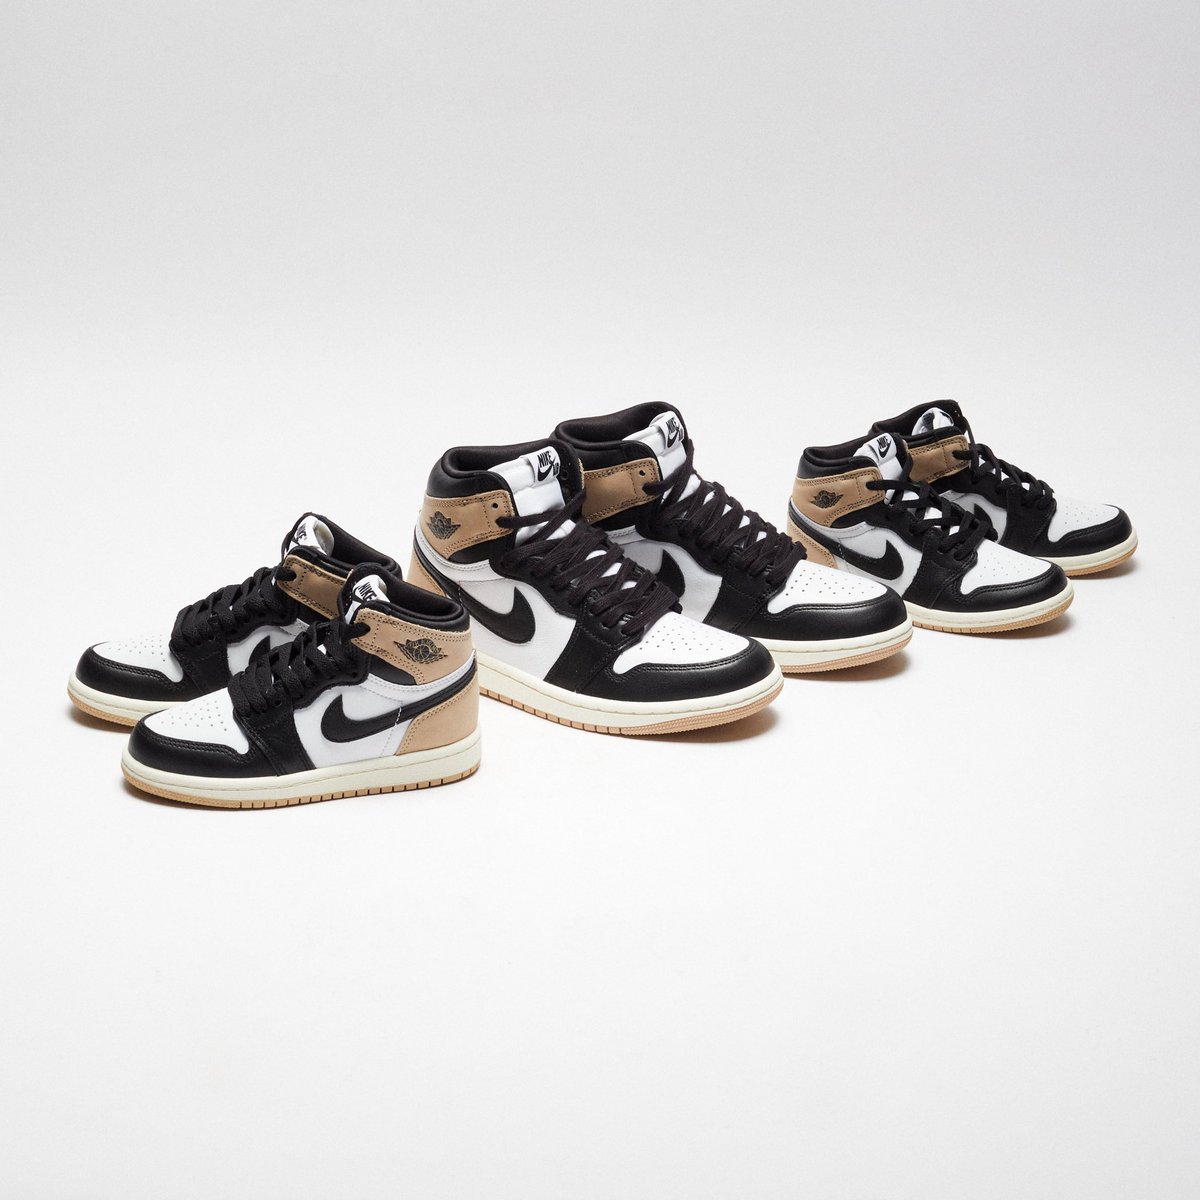 Jordan AJ 1 Retro High OG ‘Latte’ in women’s, PS and TD sizing // Available Wednesday, 5/29 at 11am at all UNDEFEATED Chapter Stores and 7am PST at Undefeated.com @jumpman23